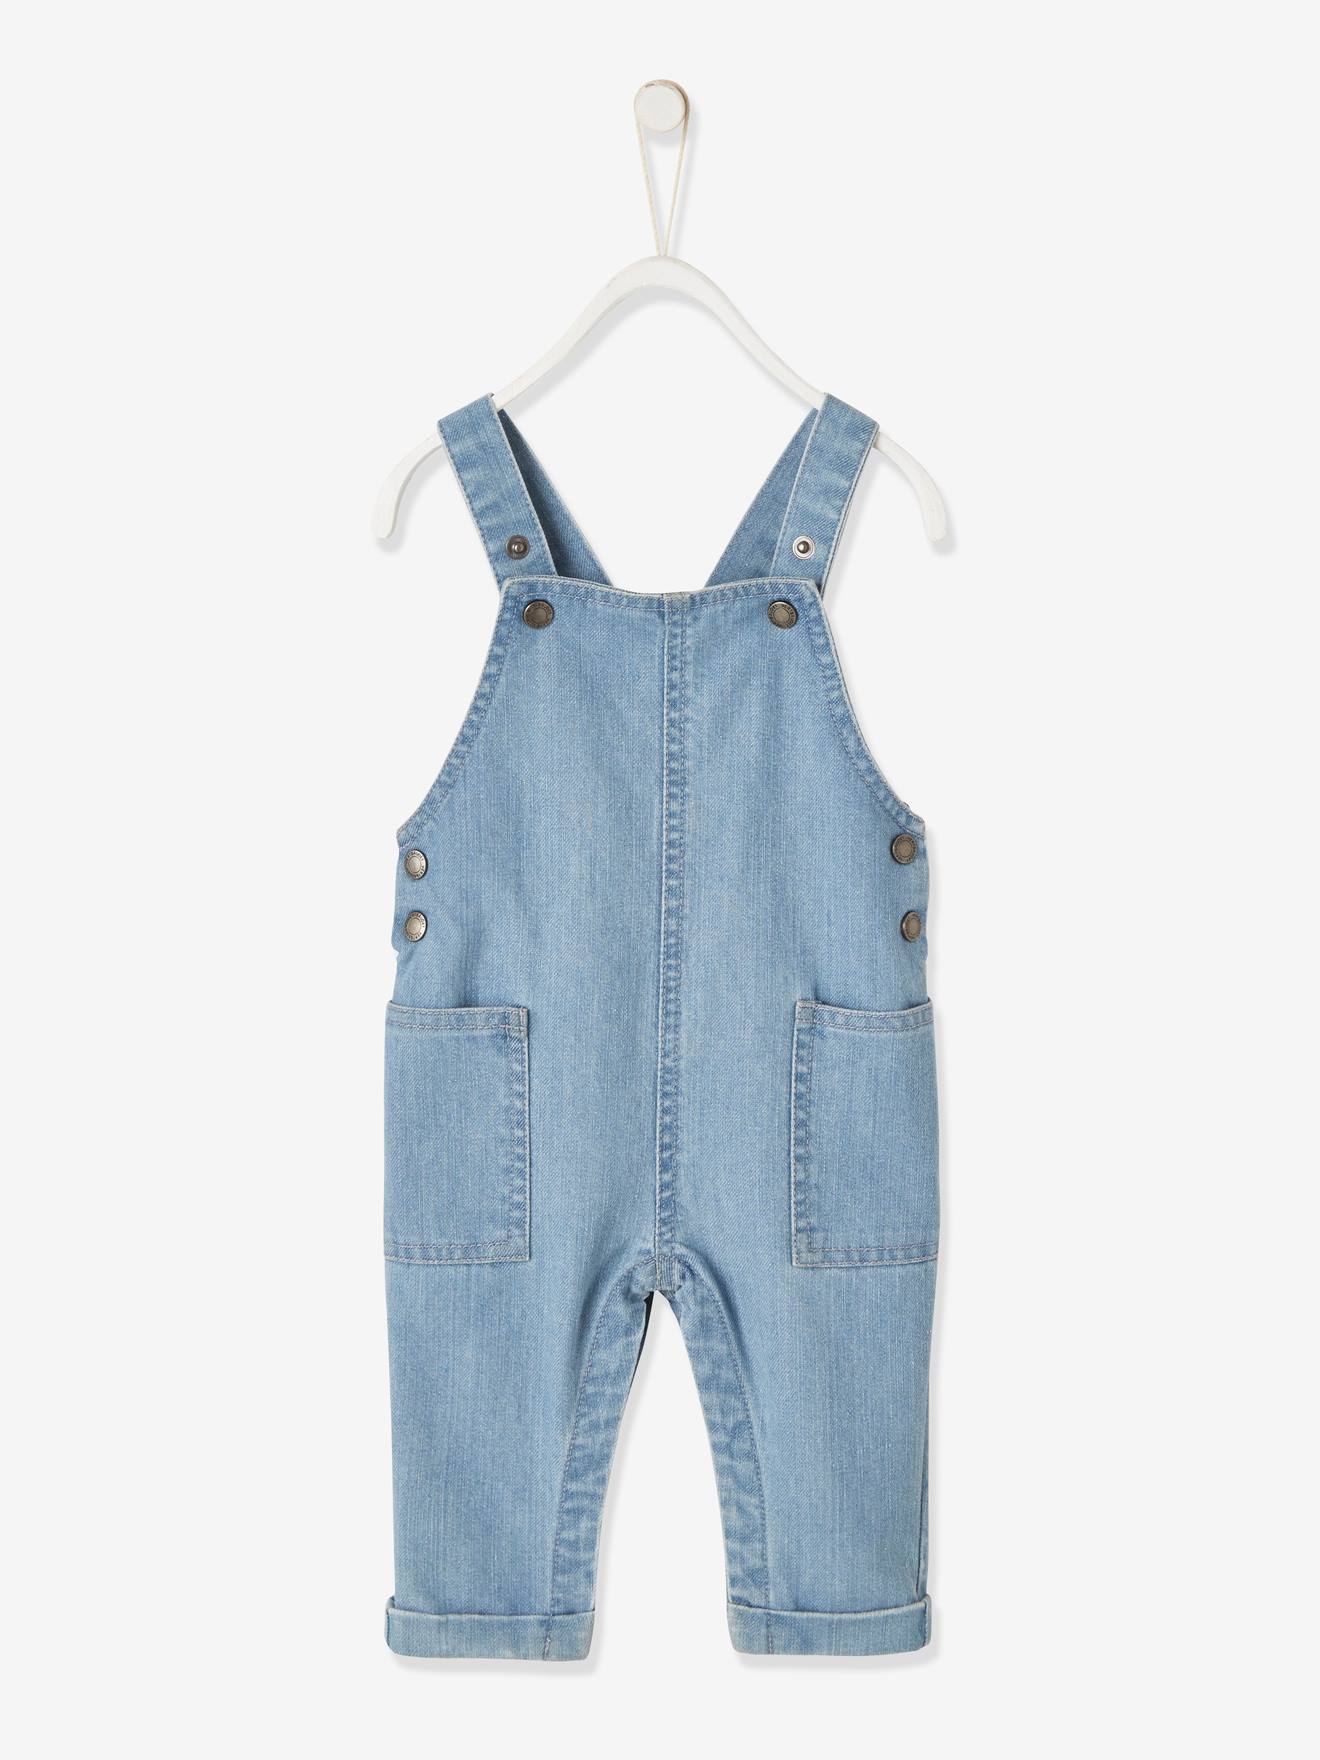 KIDS FASHION Baby Jumpsuits & Dungarees Jean Blue 6-9M Zara dungaree discount 67% 